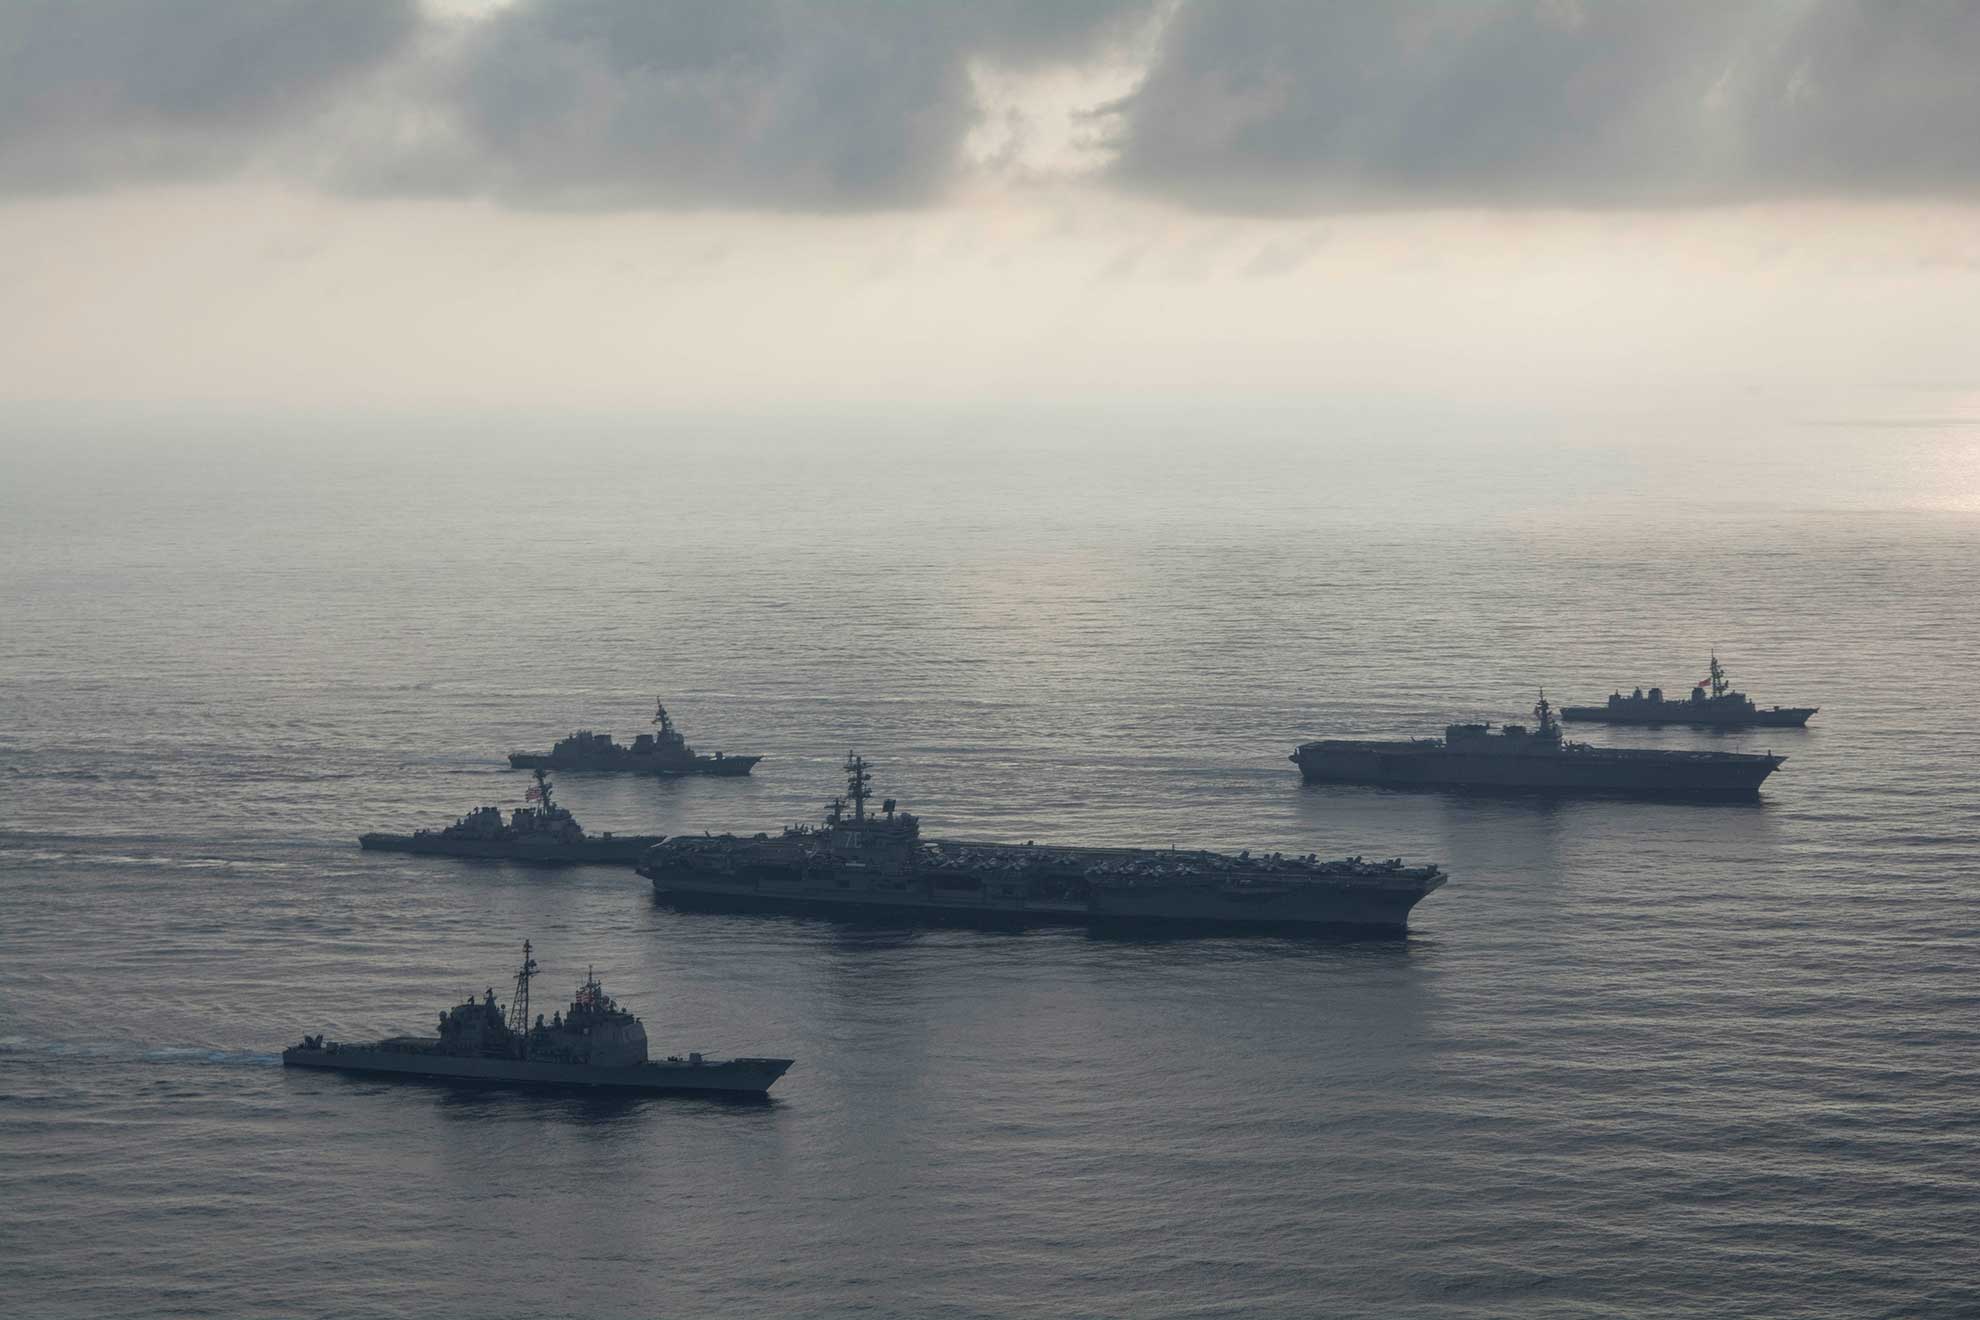 South China Sea (Aug. 31, 2018) The aircraft carrier USS Ronald Reagan (CVN 76), second from bottom, lead ship of the Ronald Reagan Carrier Strike Group, the guided-missile cruiser USS Antietam (CG 54), bottom, and the guided-missile destroyer USS Milius (DDG 69), left, conduct a photo exercise with the Japan Maritime Self-Defense Force (JMSDF) helicopter destroyer JS Kaga (DDH 184), second from top, and the JMSDF destroyers JS Inazuma (DD 105) and JS Suzutsuki (DD 117). The Ronald Reagan Carrier Strike Group is forward-deployed to the U.S. 7th Fleet area of operations in support of security and stability in the Indo-Pacific region.-- U.S. Navy photo by MC S3 Erwin Jacob Villavicencio Miciano. -